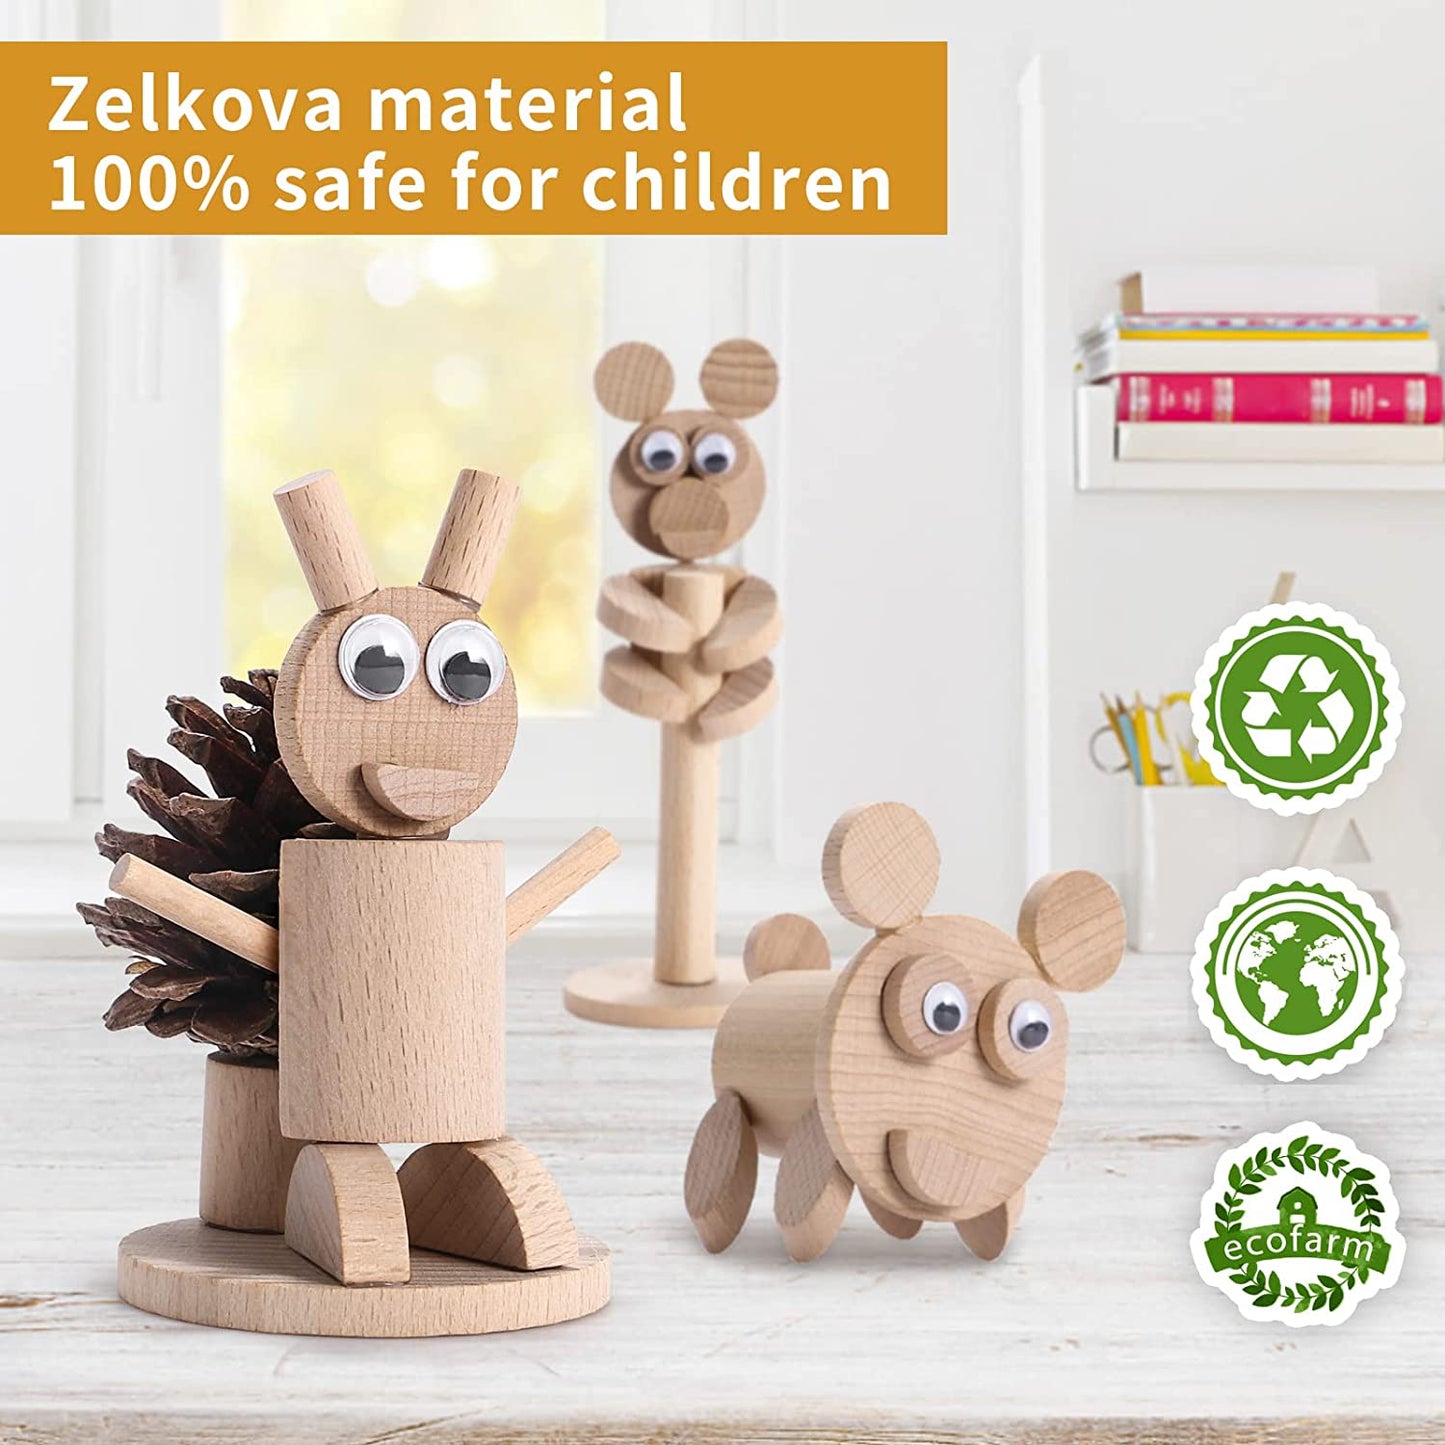 8 in 1 Craft Wooden Puzzle for Kids Kids Boys Girls Educational Toys 3D DIY Stem Building Toys Toddler Animal Craft Kits